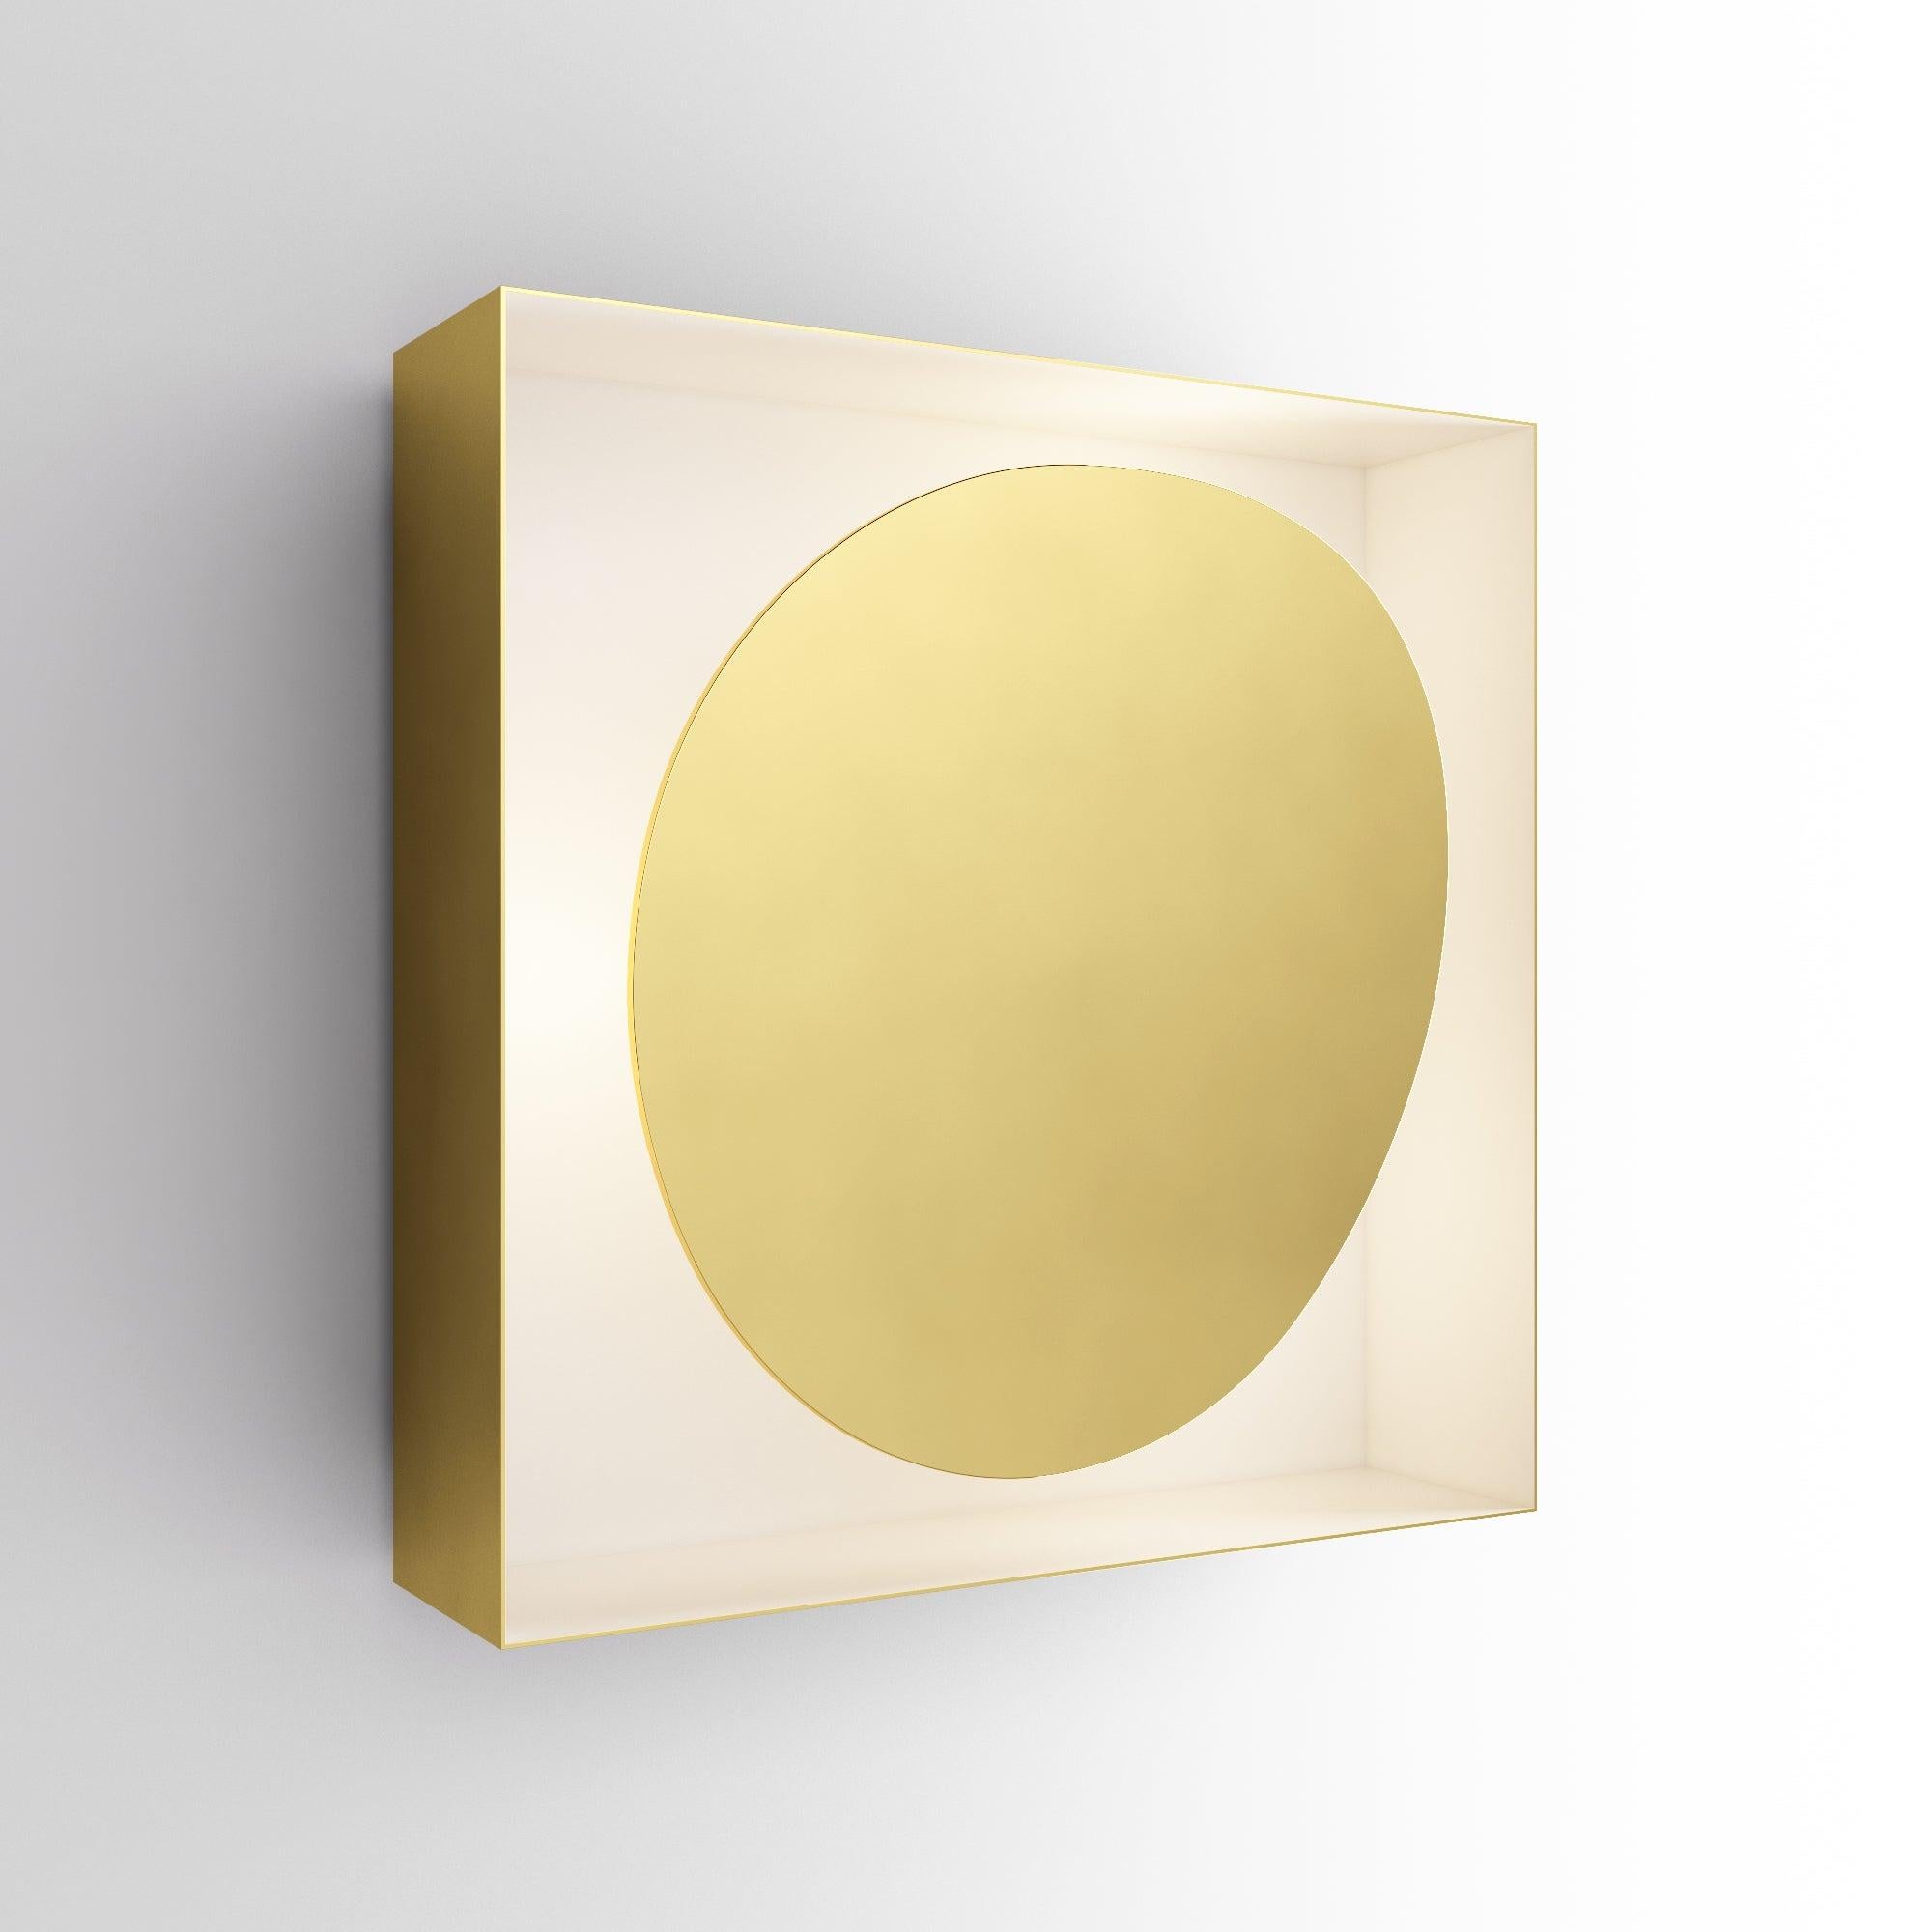 Wall sconce FC02 is a wall sculpture light designed by the Argentine architect Florencia Costa in polished brass and brass mirror; made in Italy 2020 in Limited Edition: an harmonious relation between design and architecture, technology and